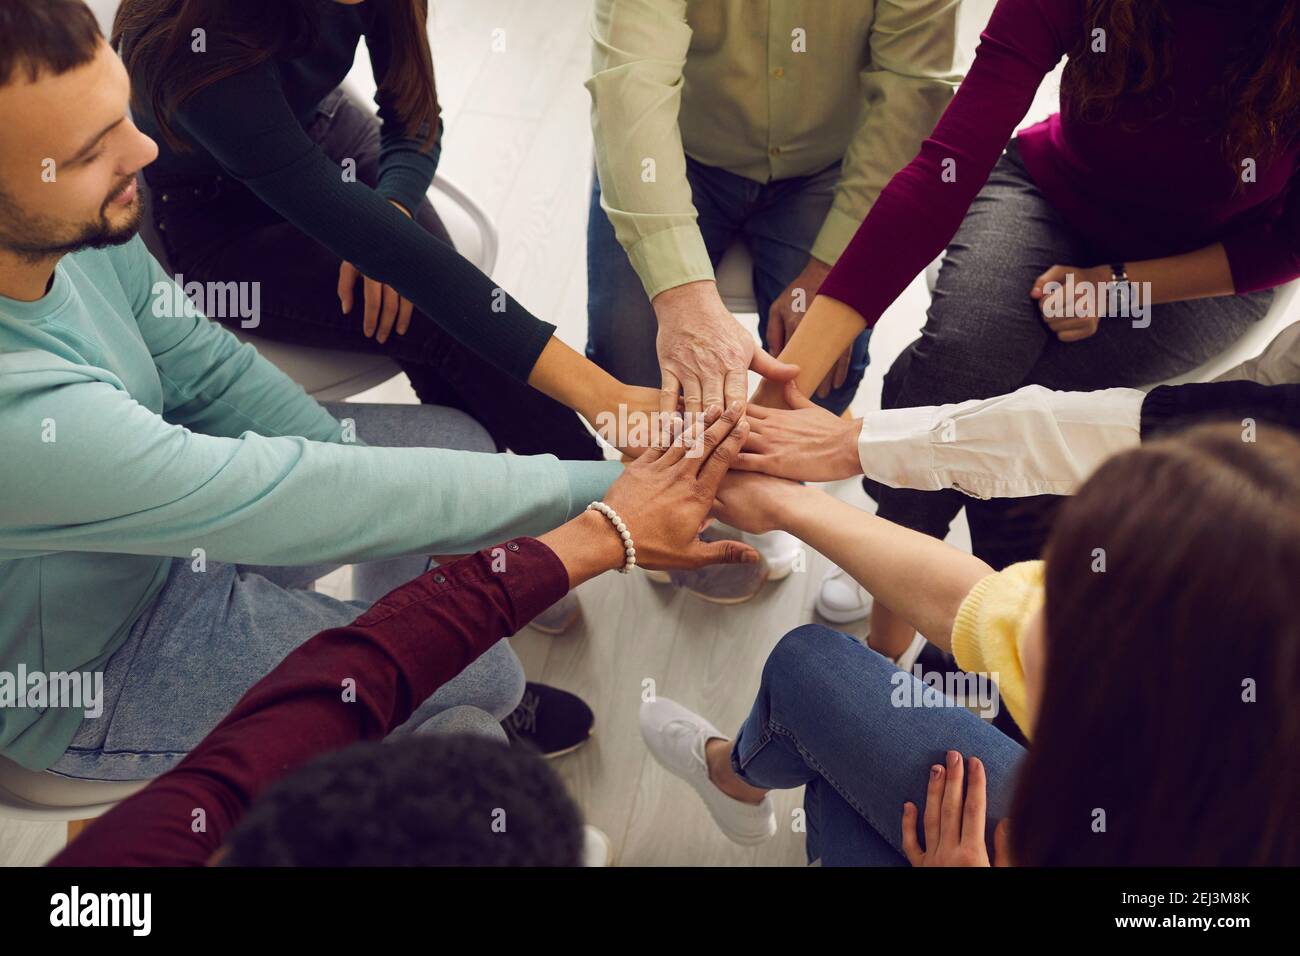 High angle of people joining hands in community meeting or group therapy session Stock Photo